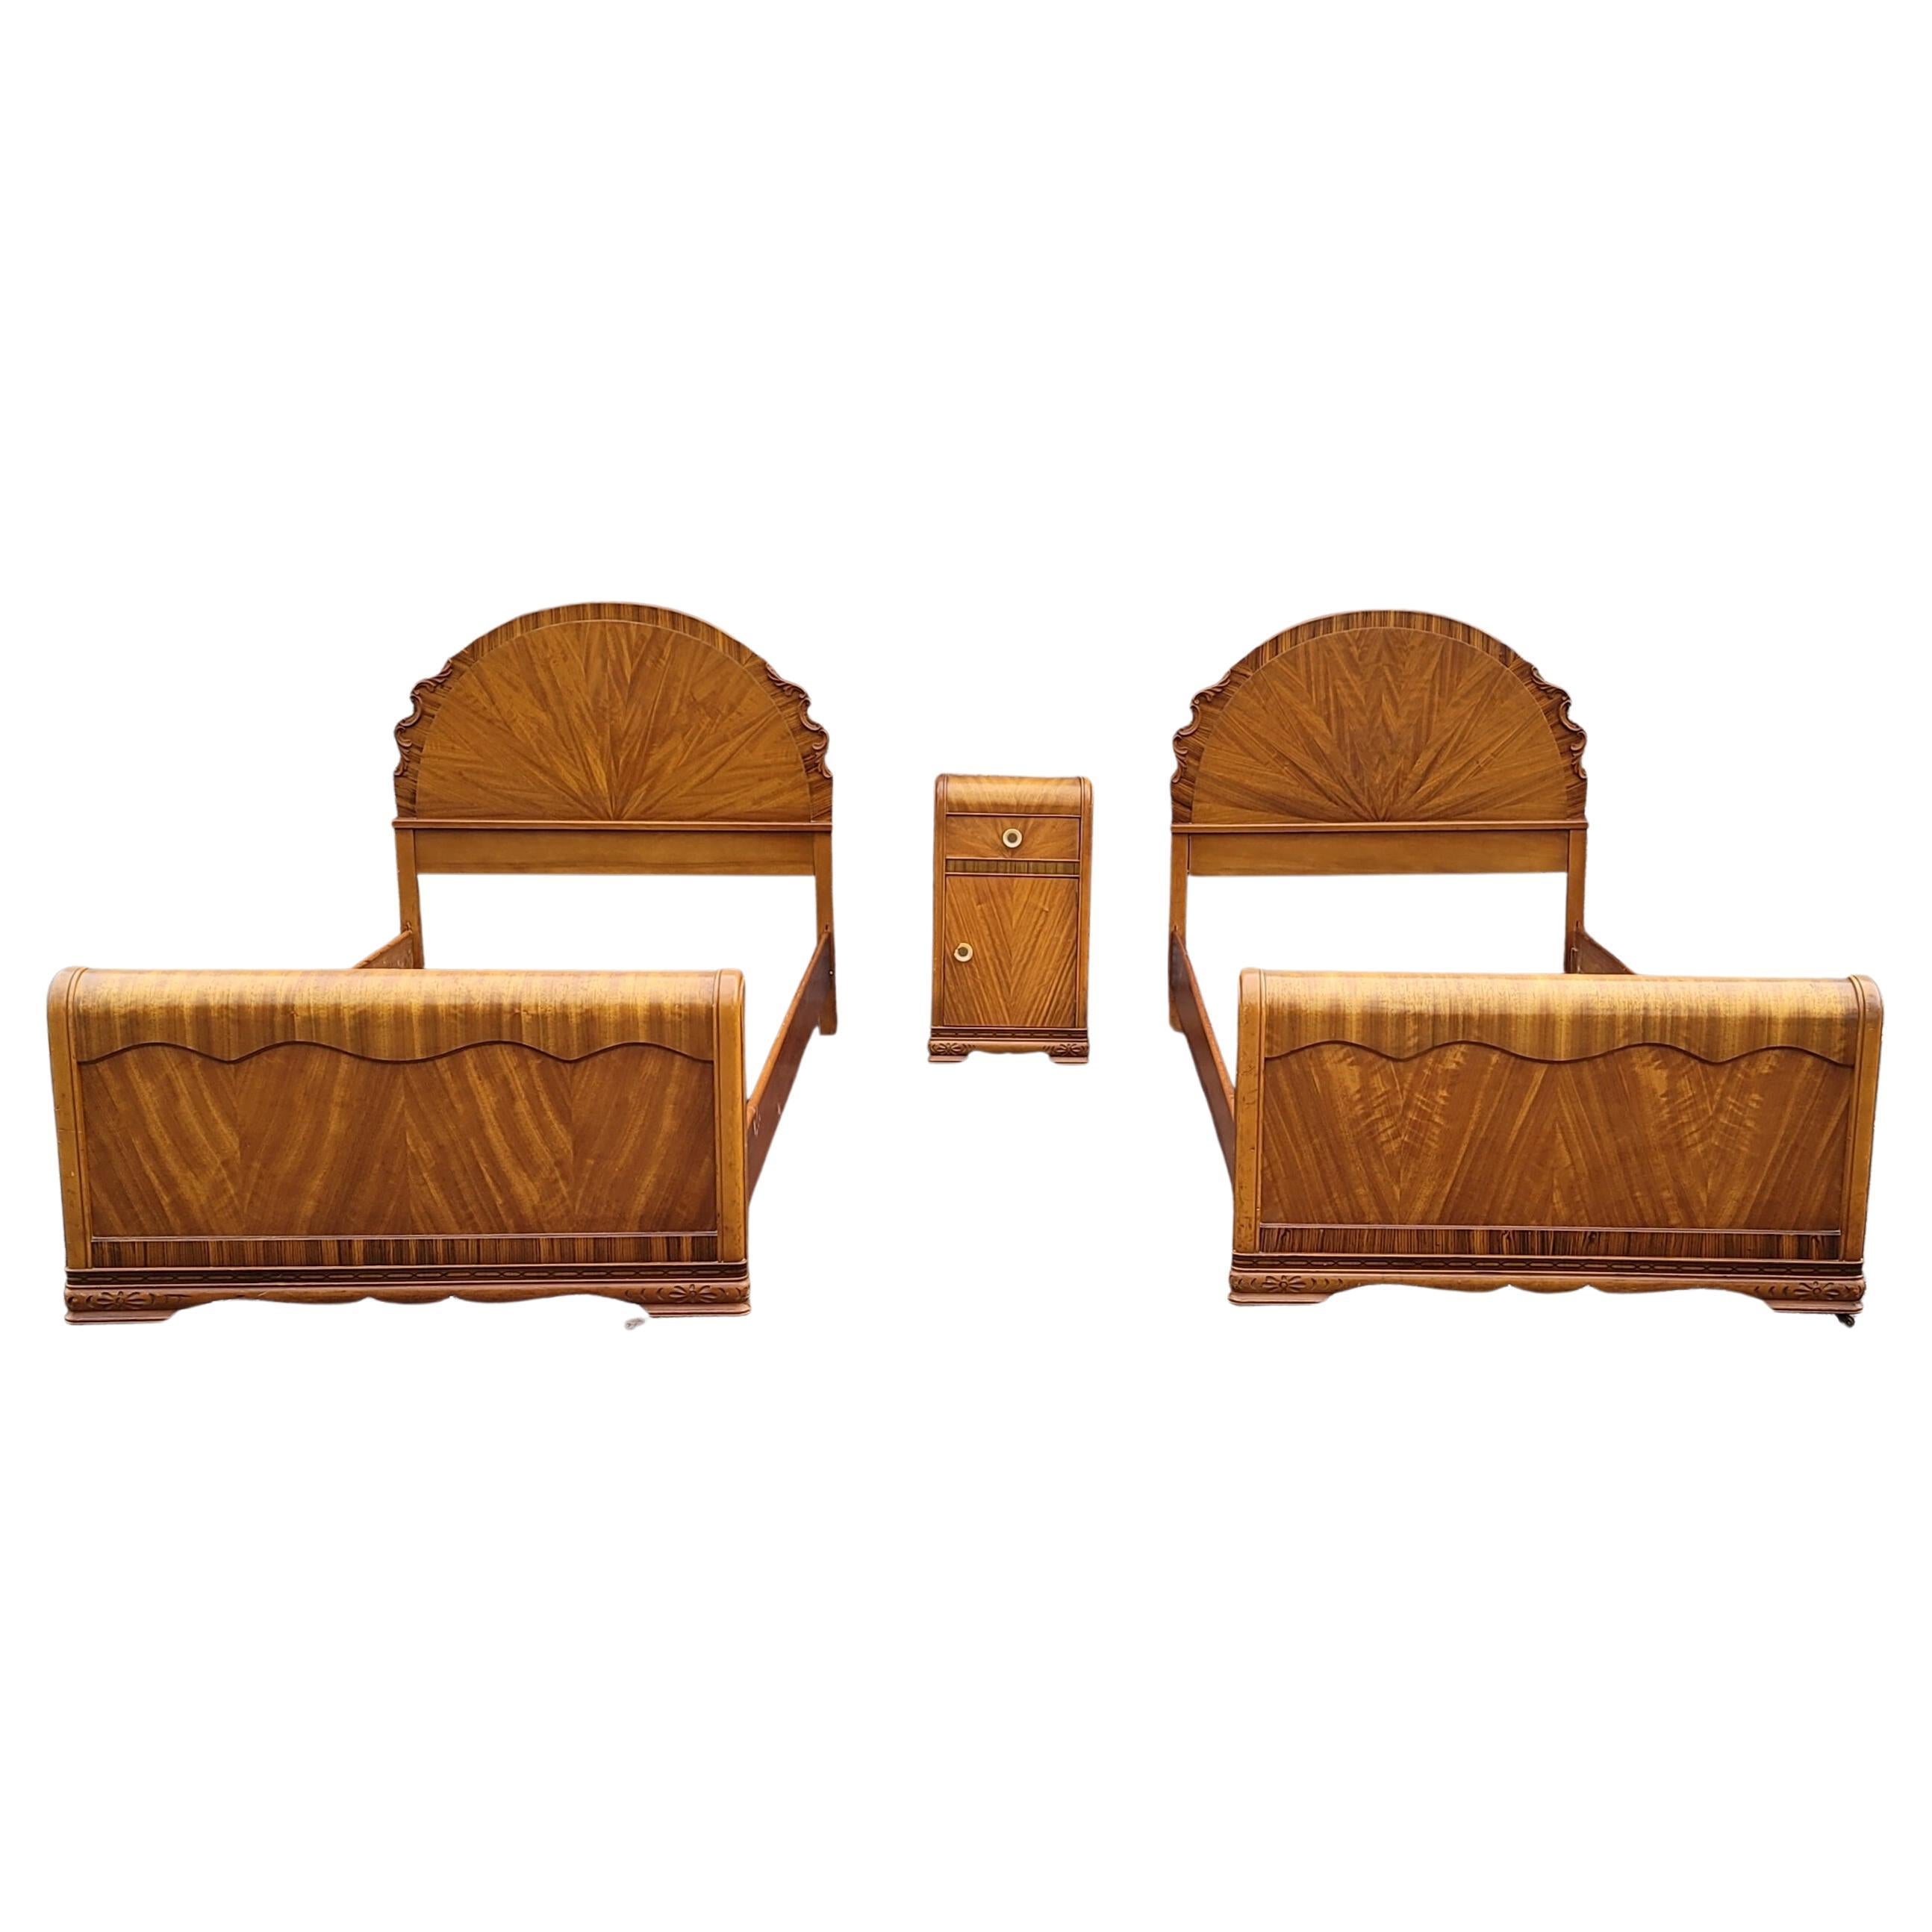 A Pair of 1930s Art Deco Mahogany Twin Size Bedsteads im Angebot 4